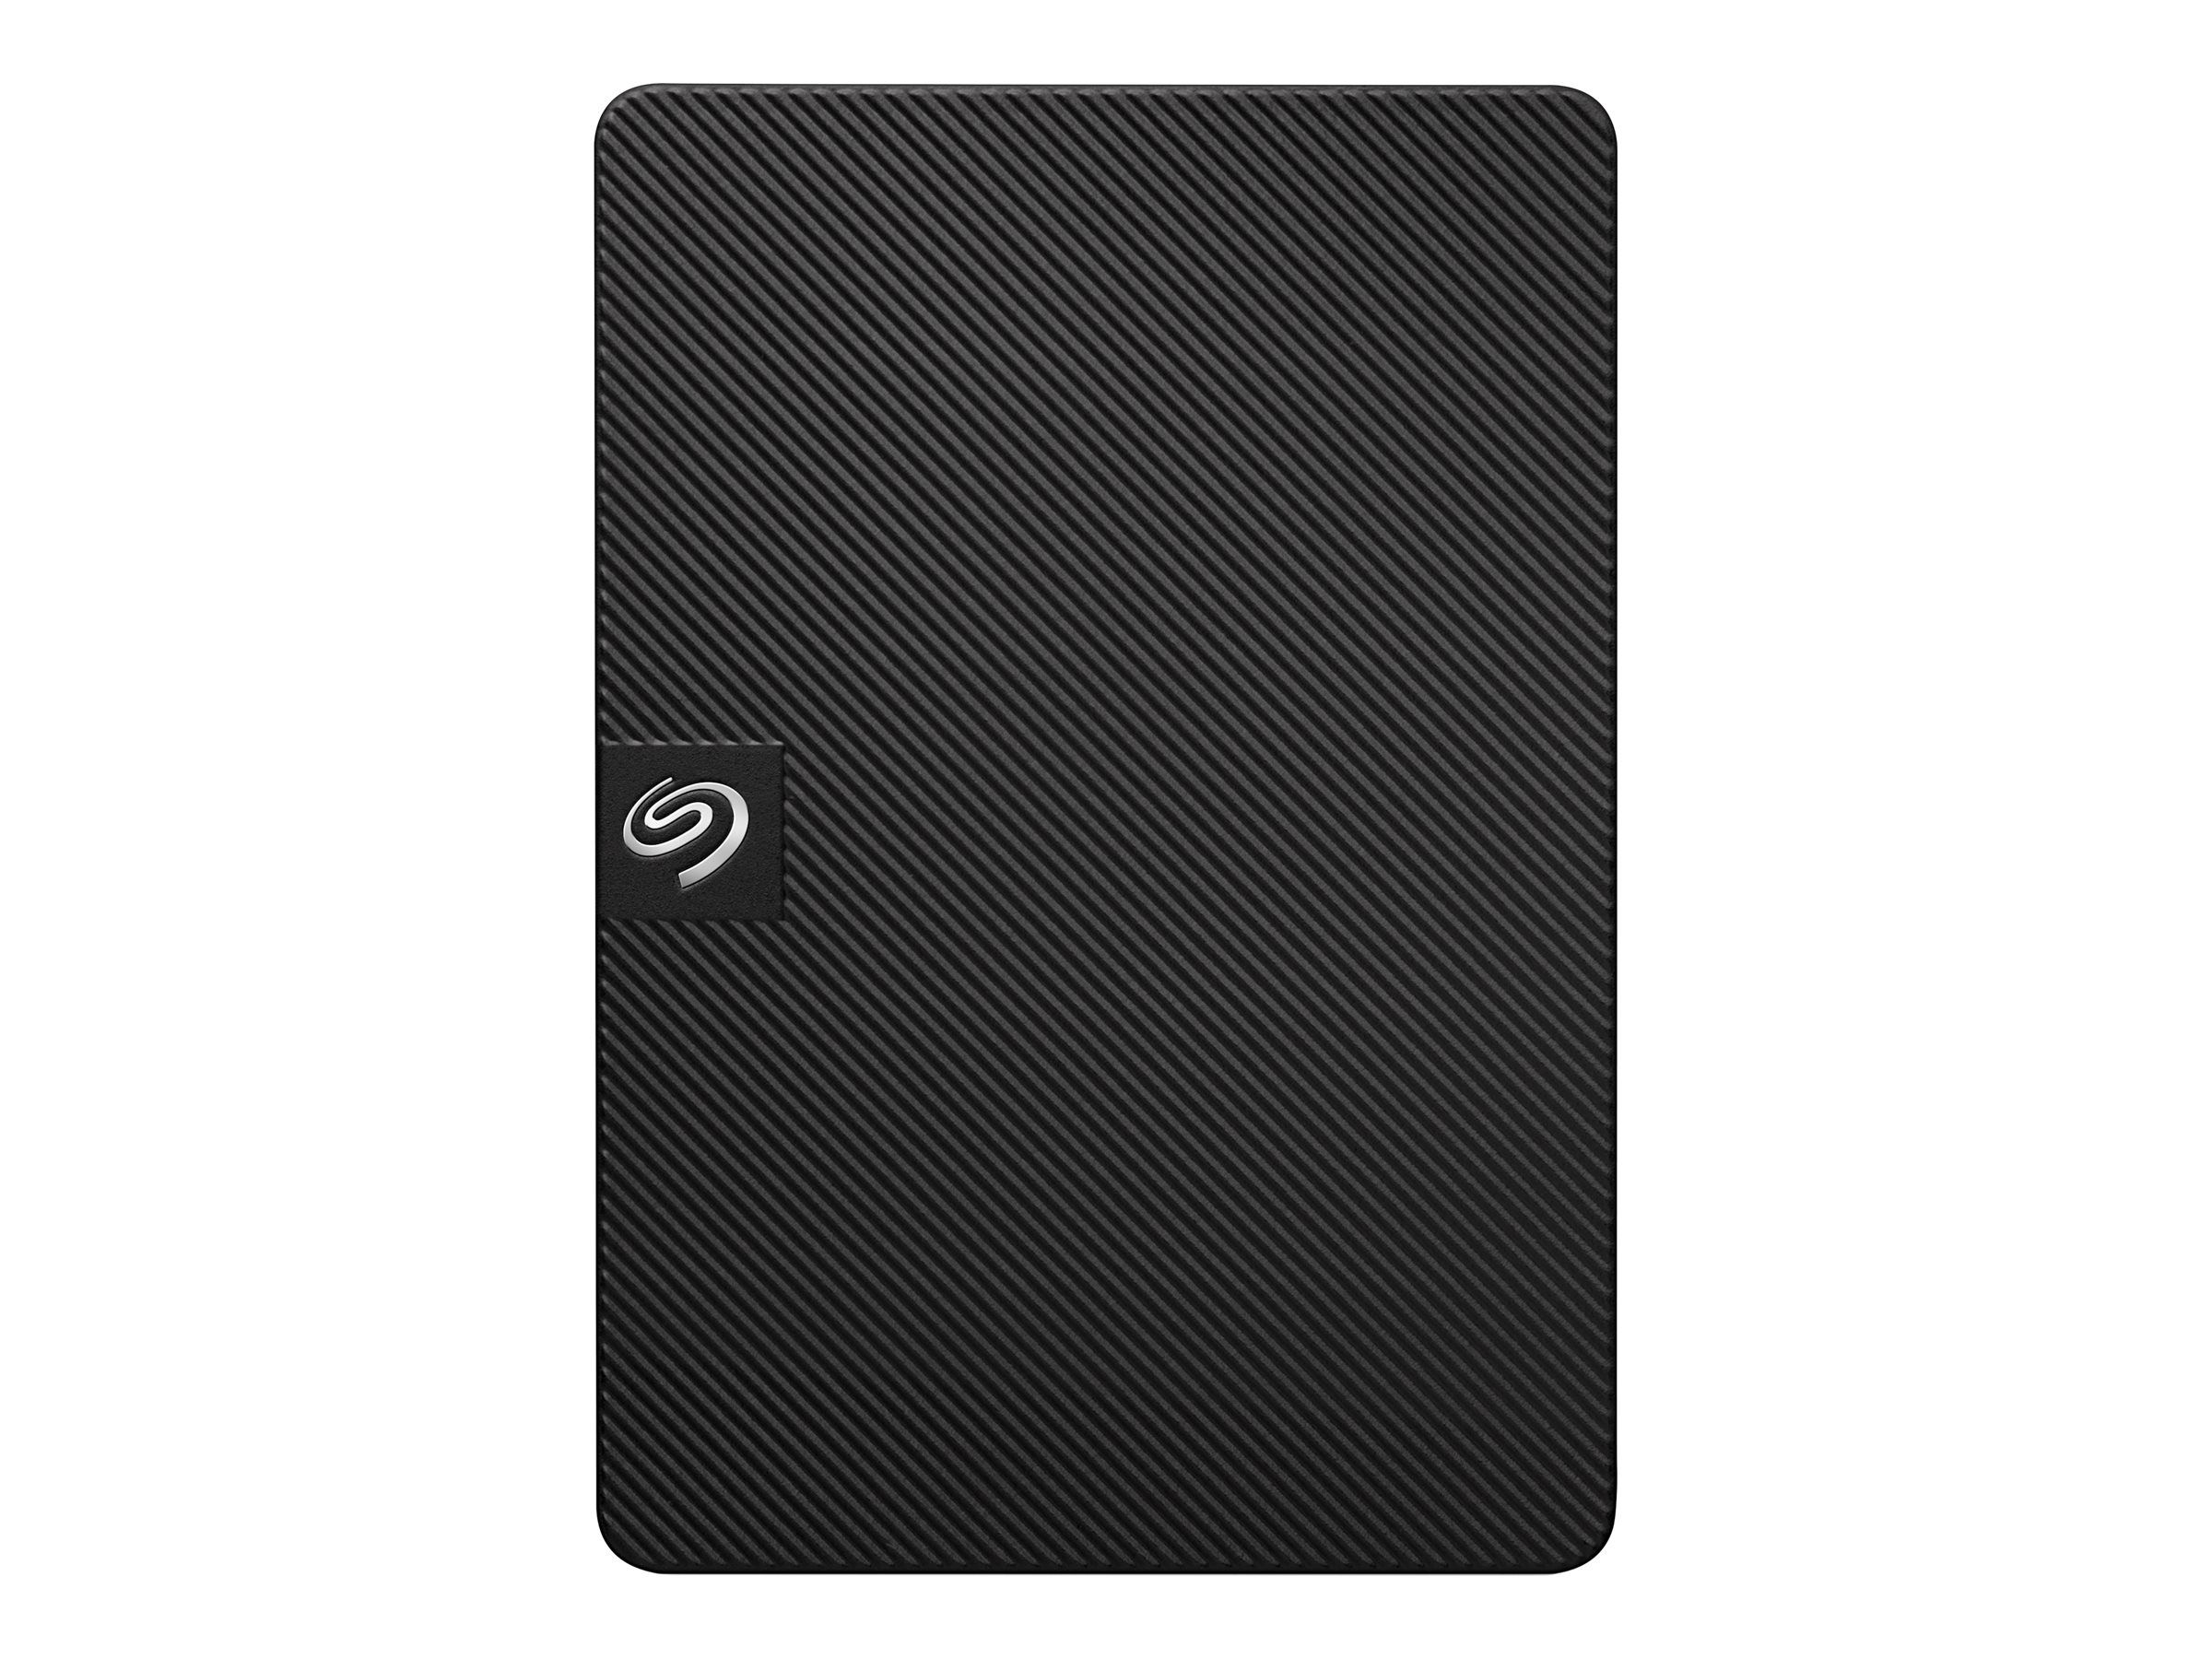 Seagate Game Drive for PS4 STGD2000200 - Festplatte - 2 TB - extern  (tragbar) | 656611551